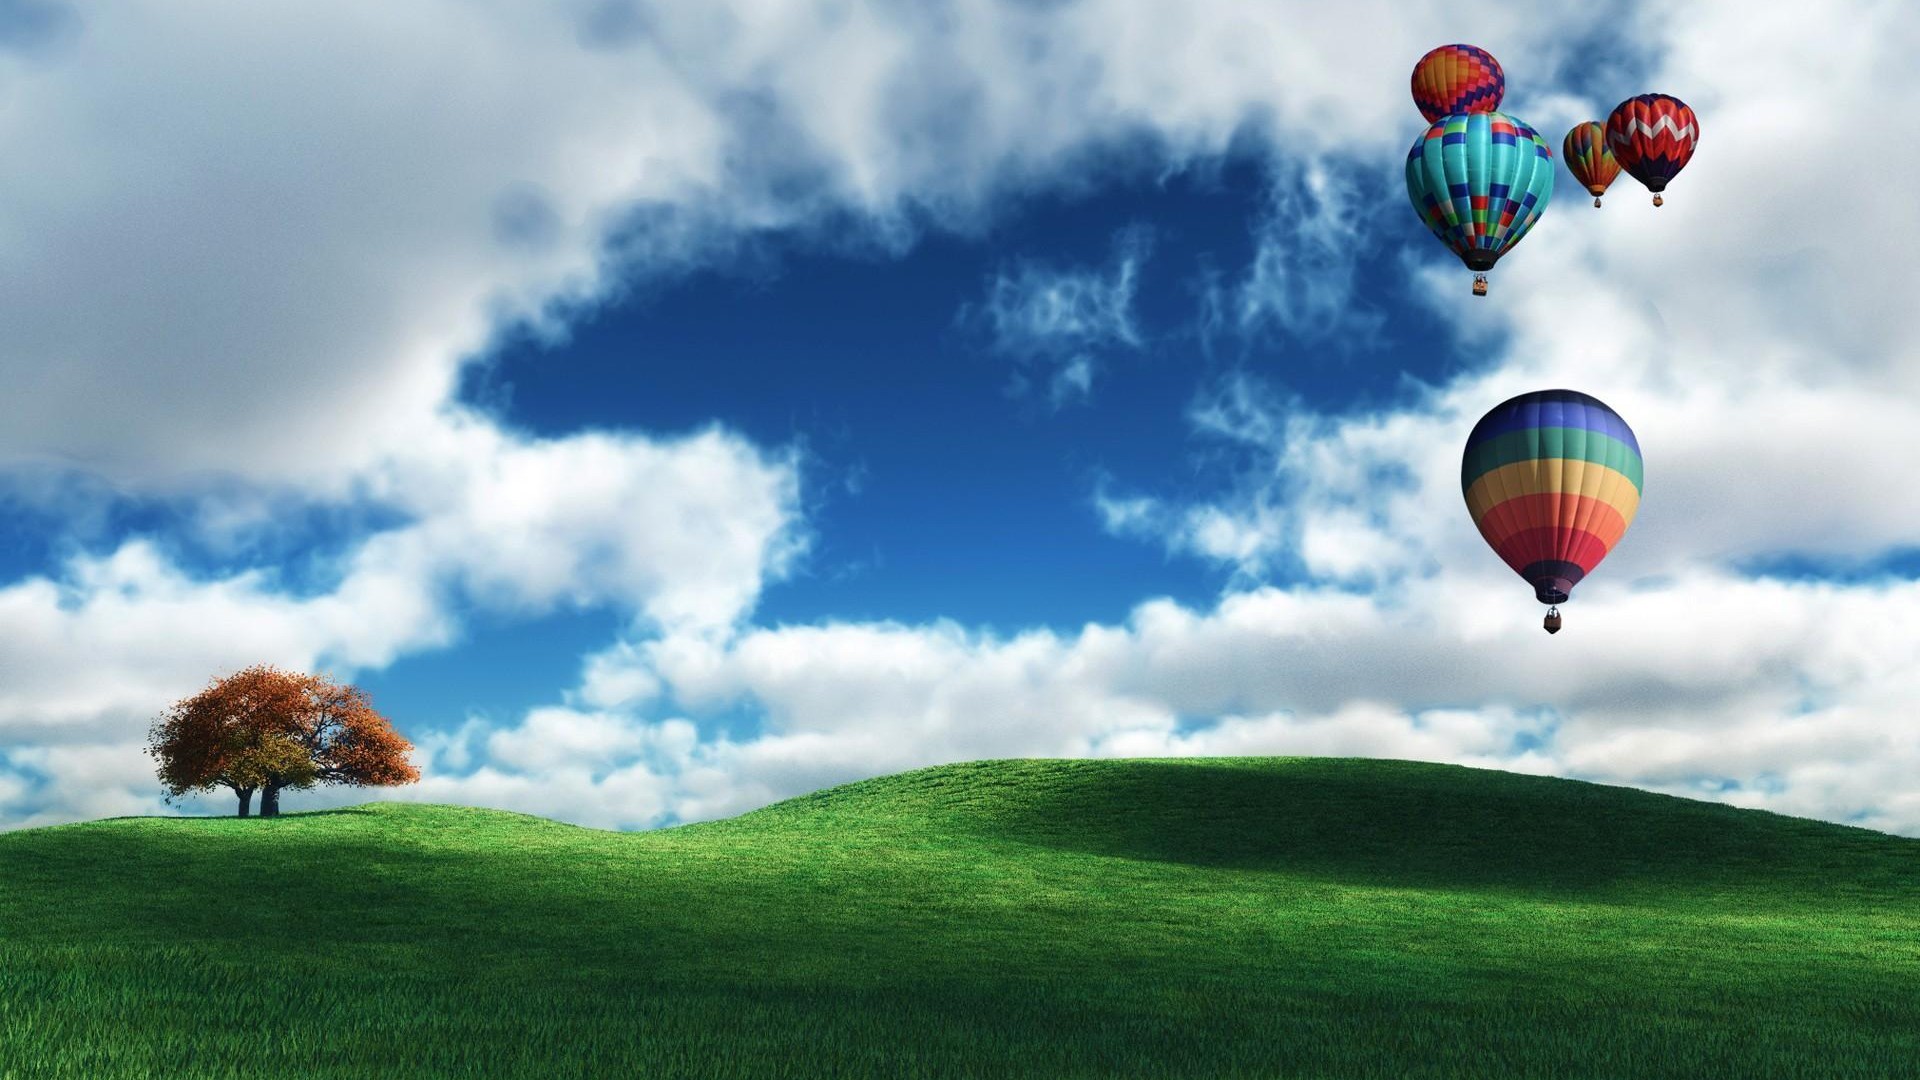 Download Lonely Tree Green Field Balloon Vehicle Hot Air Balloon HD ...